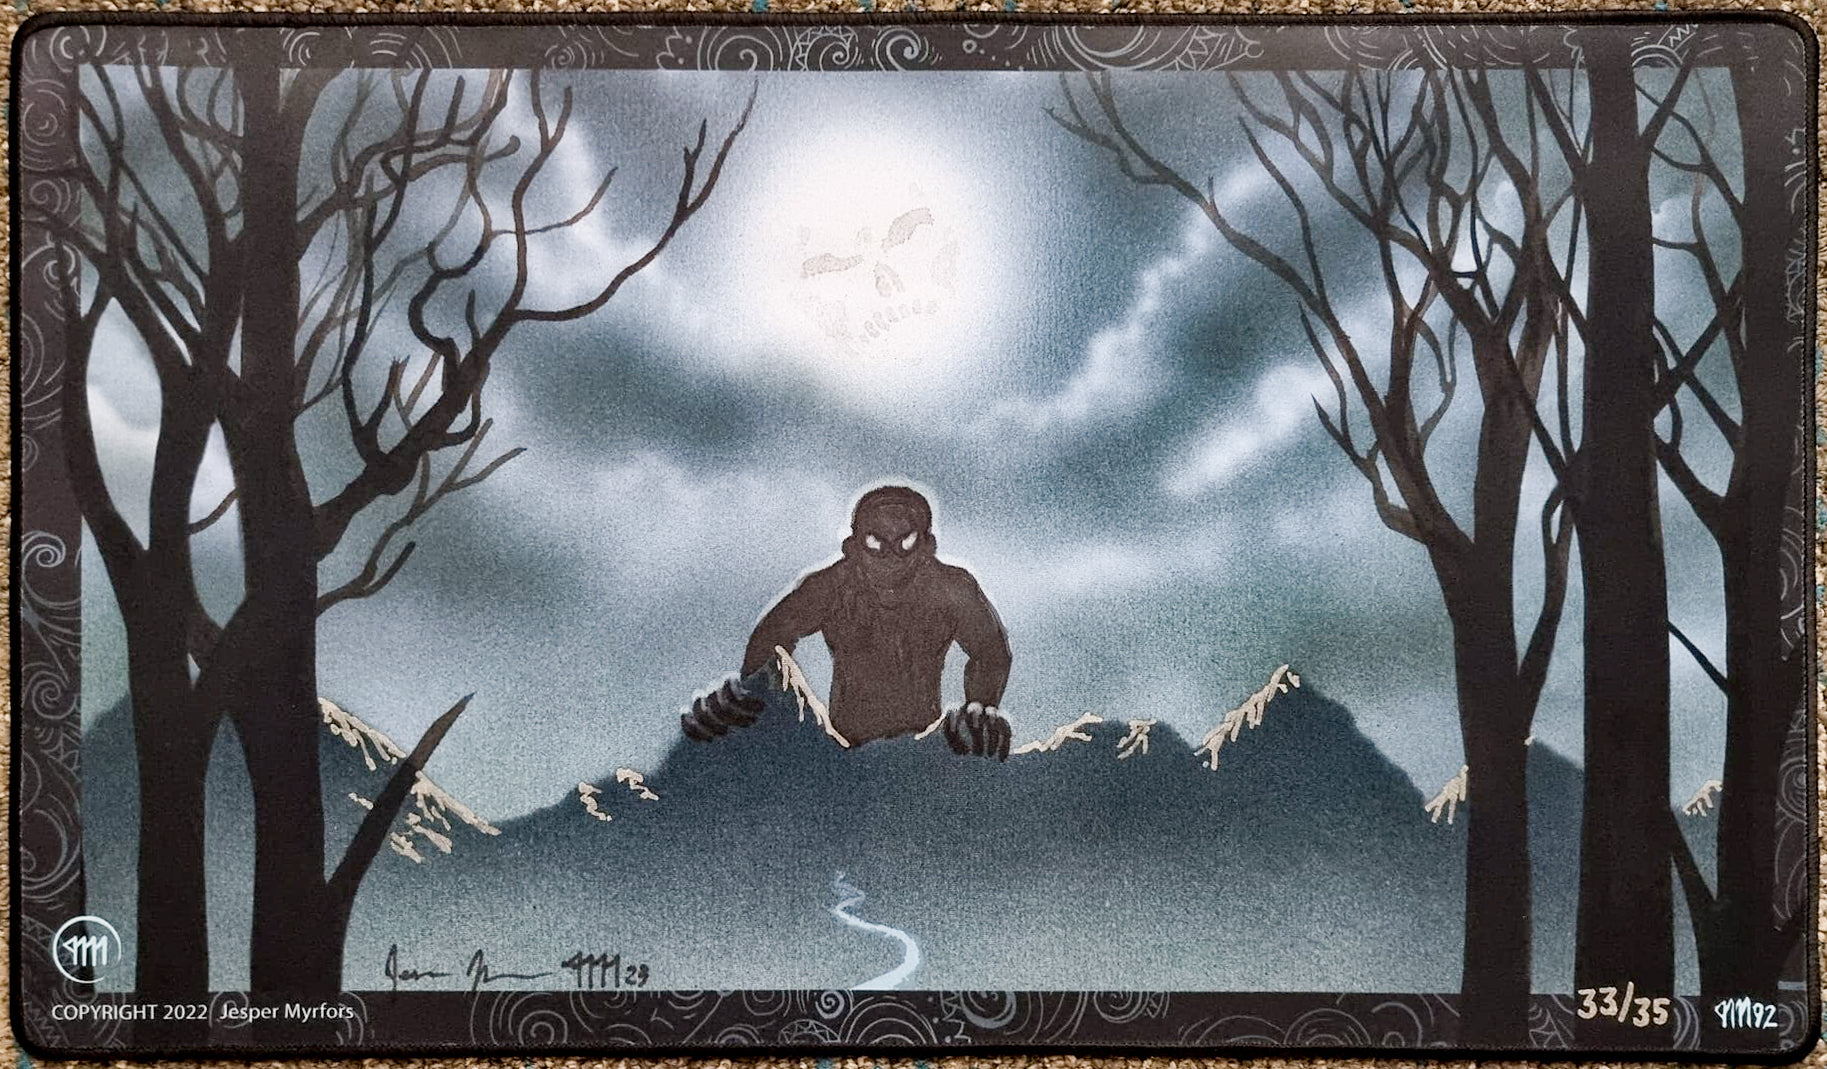 Bad Moon - Jesper Myrfors - Artist Proof Limited Edition [#33 of 35 Copies] - Signed by the Artist - Embroidered - MTG Playmat